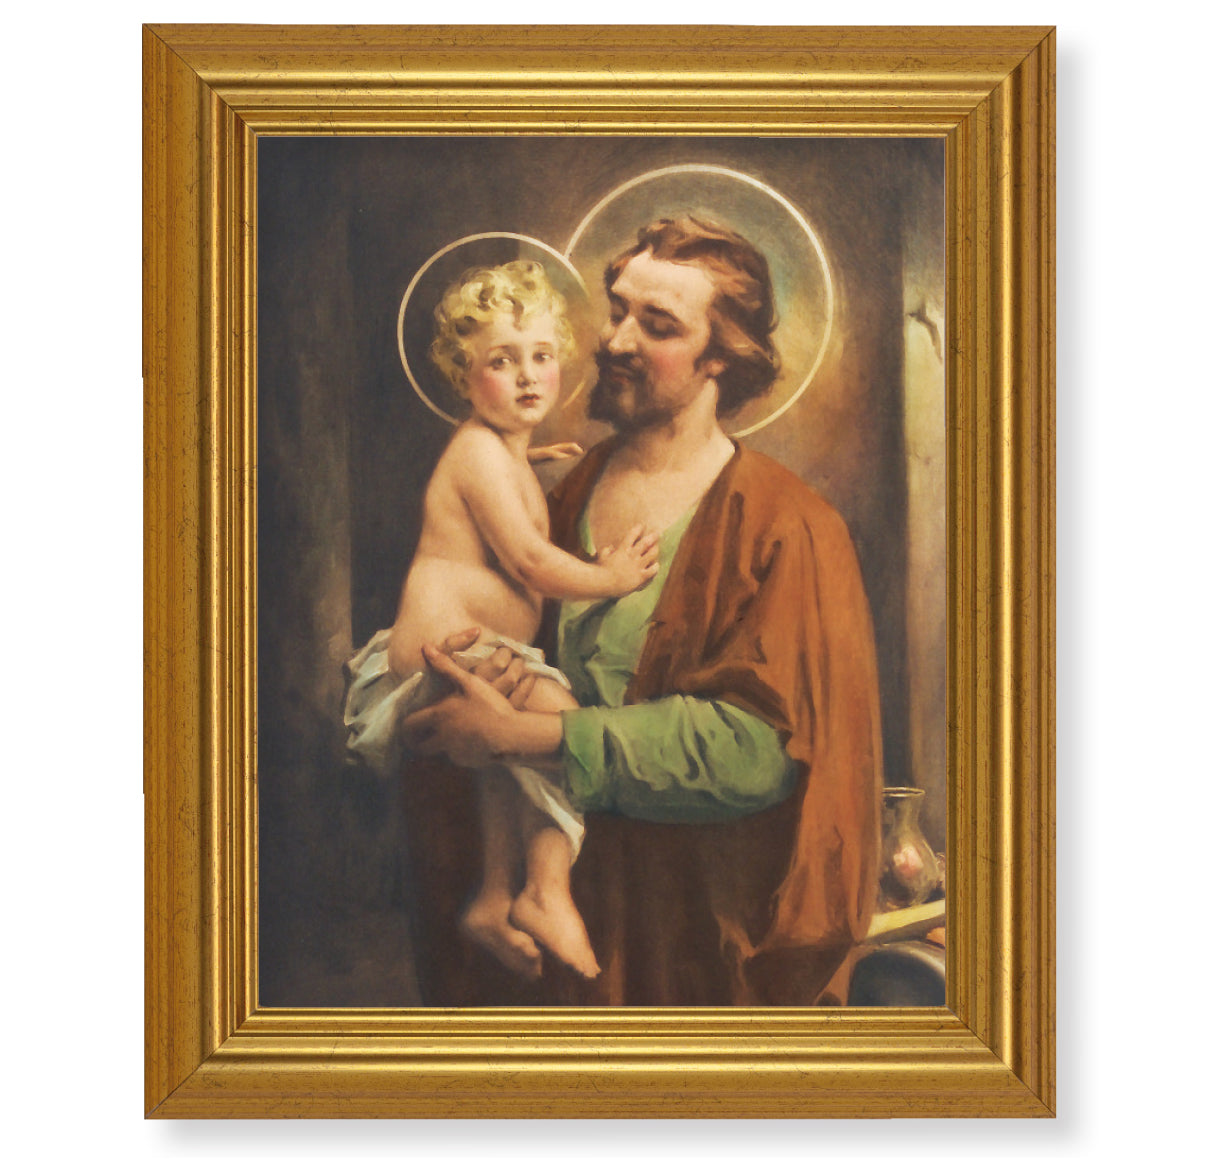 St. Joseph with Jesus Picture Framed Wall Art Decor, Large, Antique Gold-Leaf Classic Frame